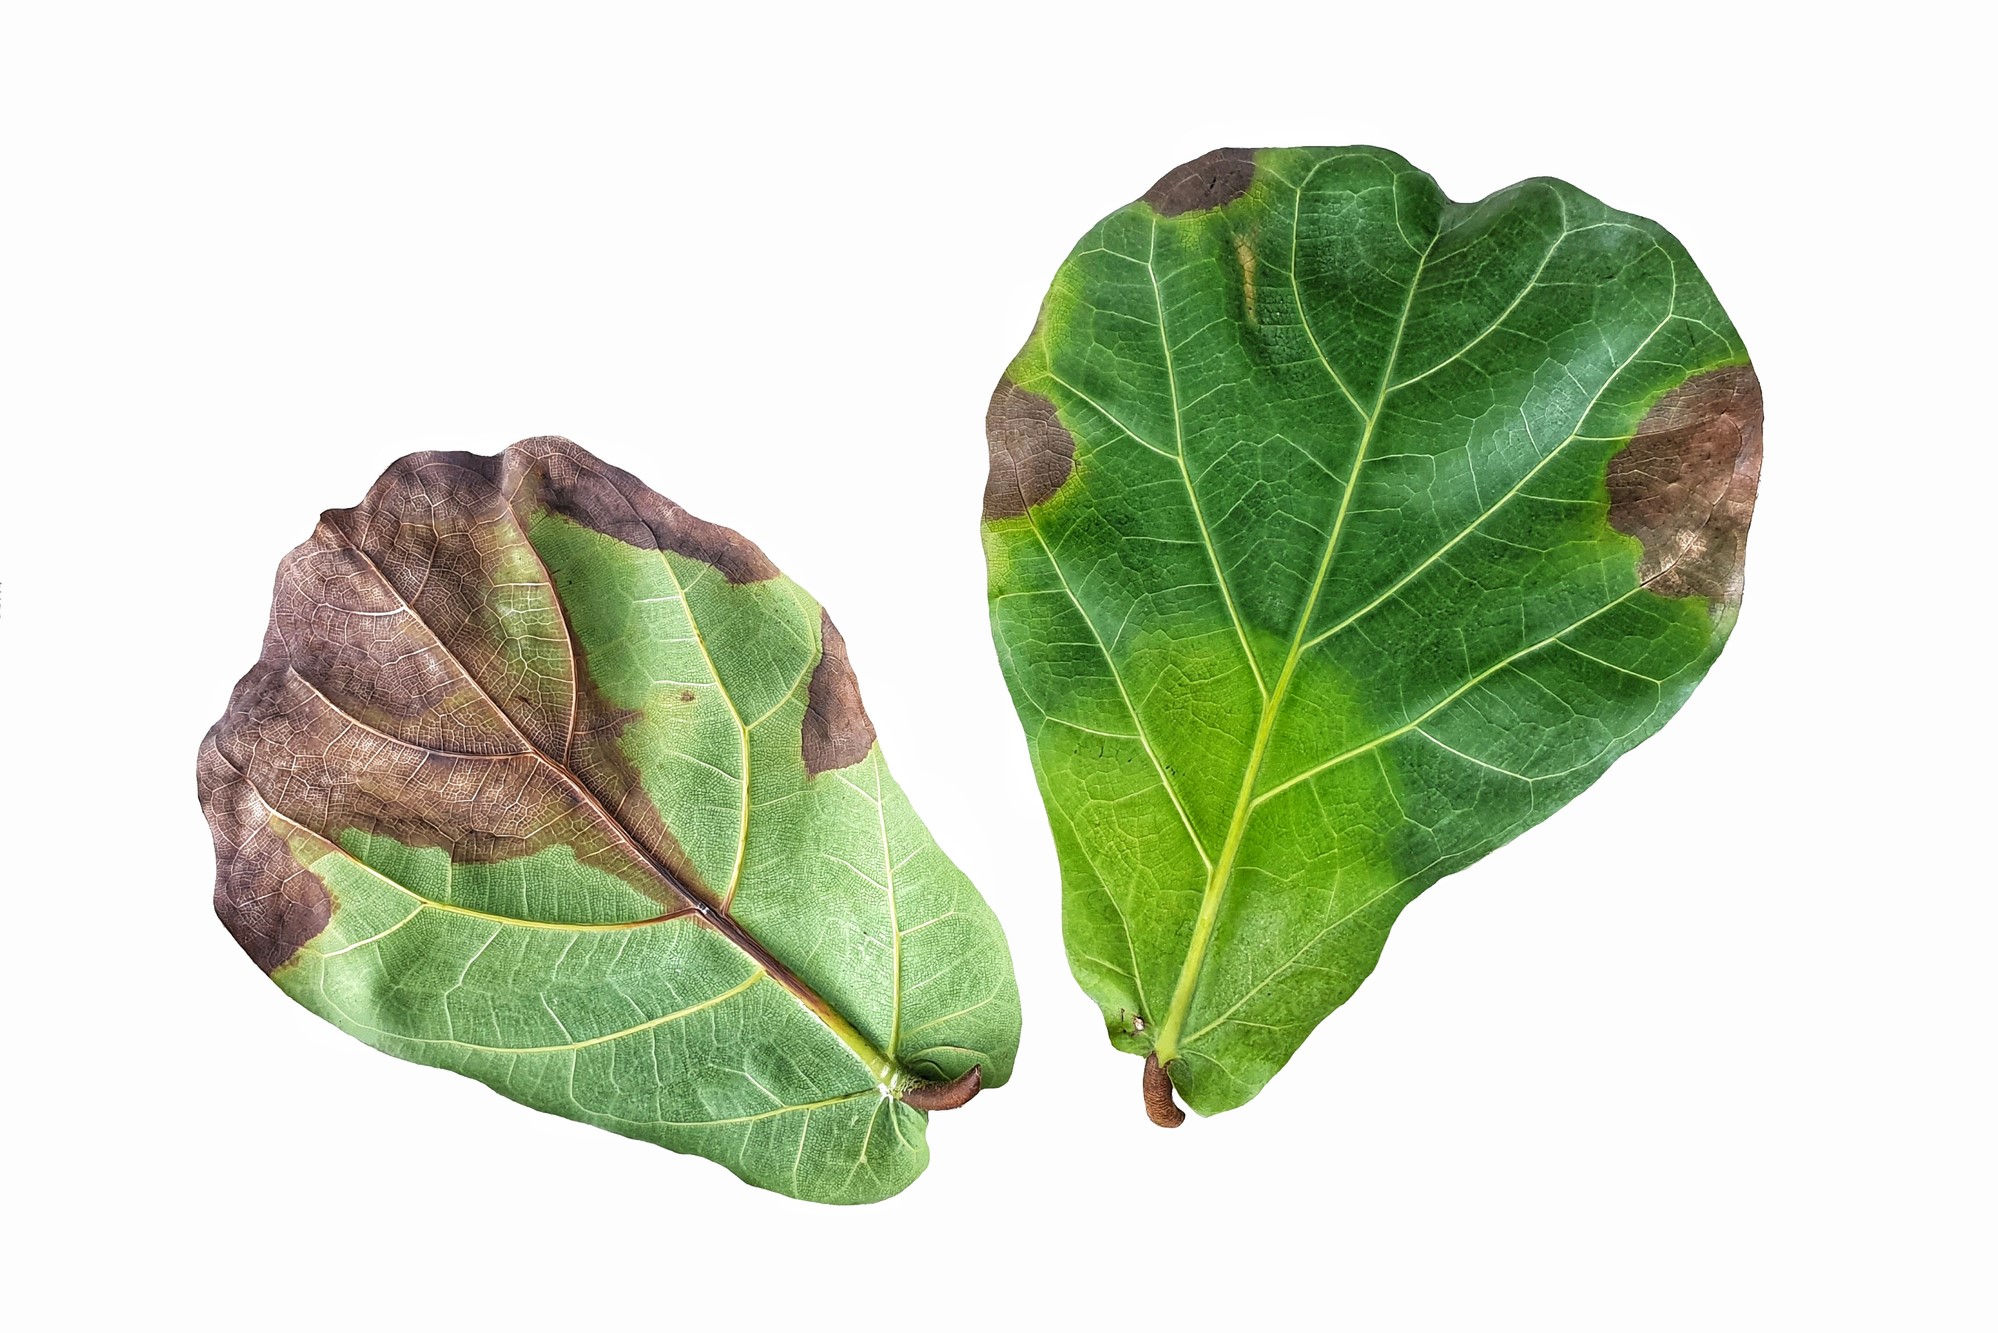  Get your fiddle-leaf fig leaves back to beautiful green: Treating brown spots